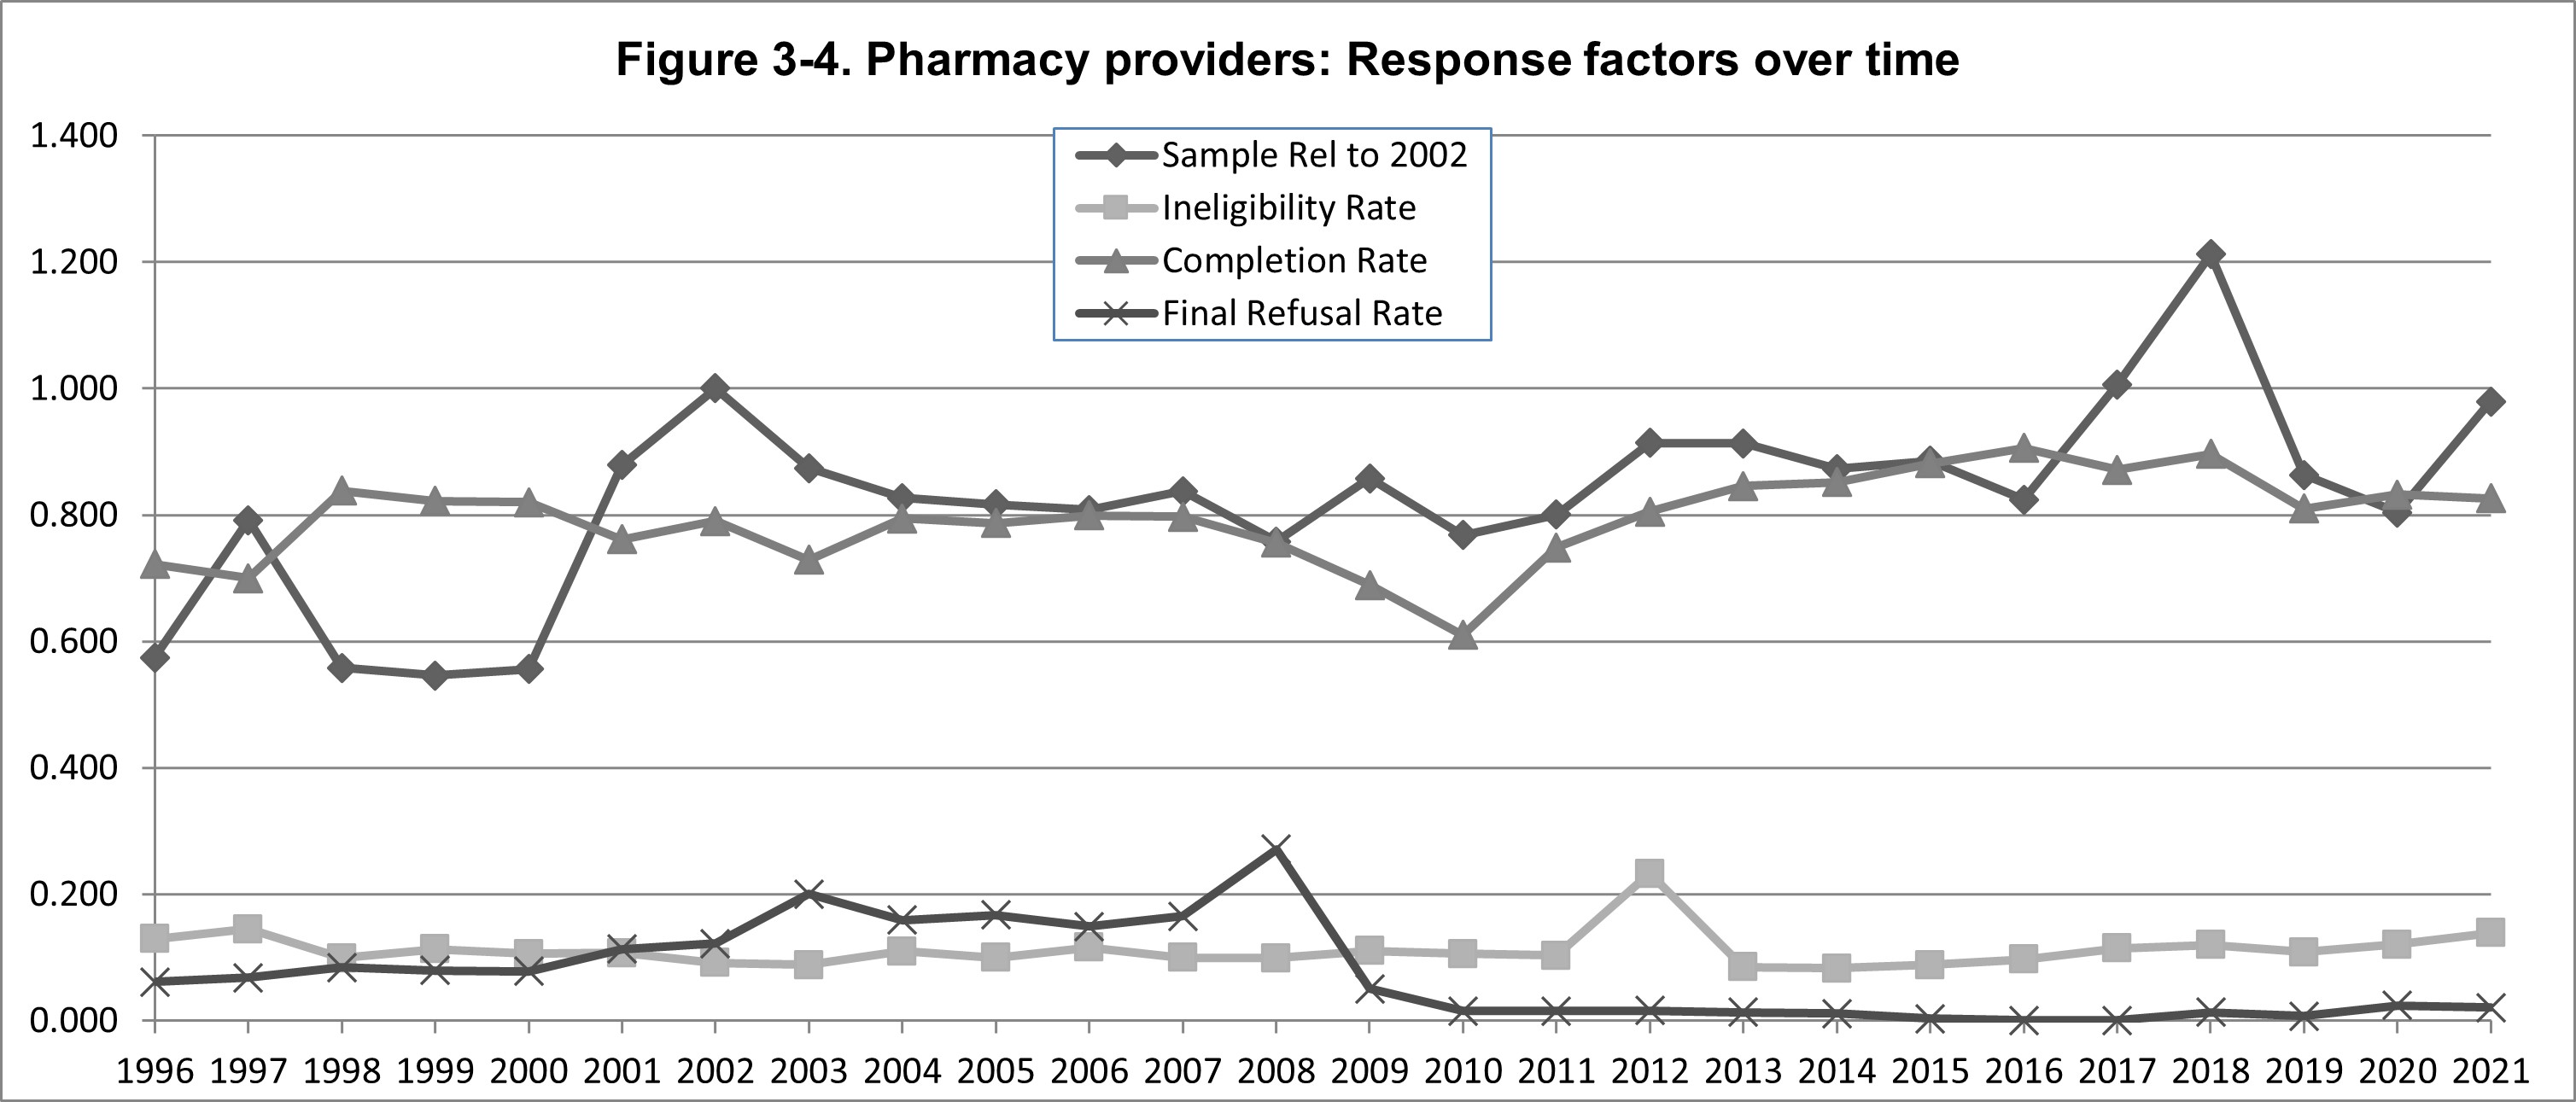 Image displaying response factors over time, from 1996 through 2021 for pharmacy providers